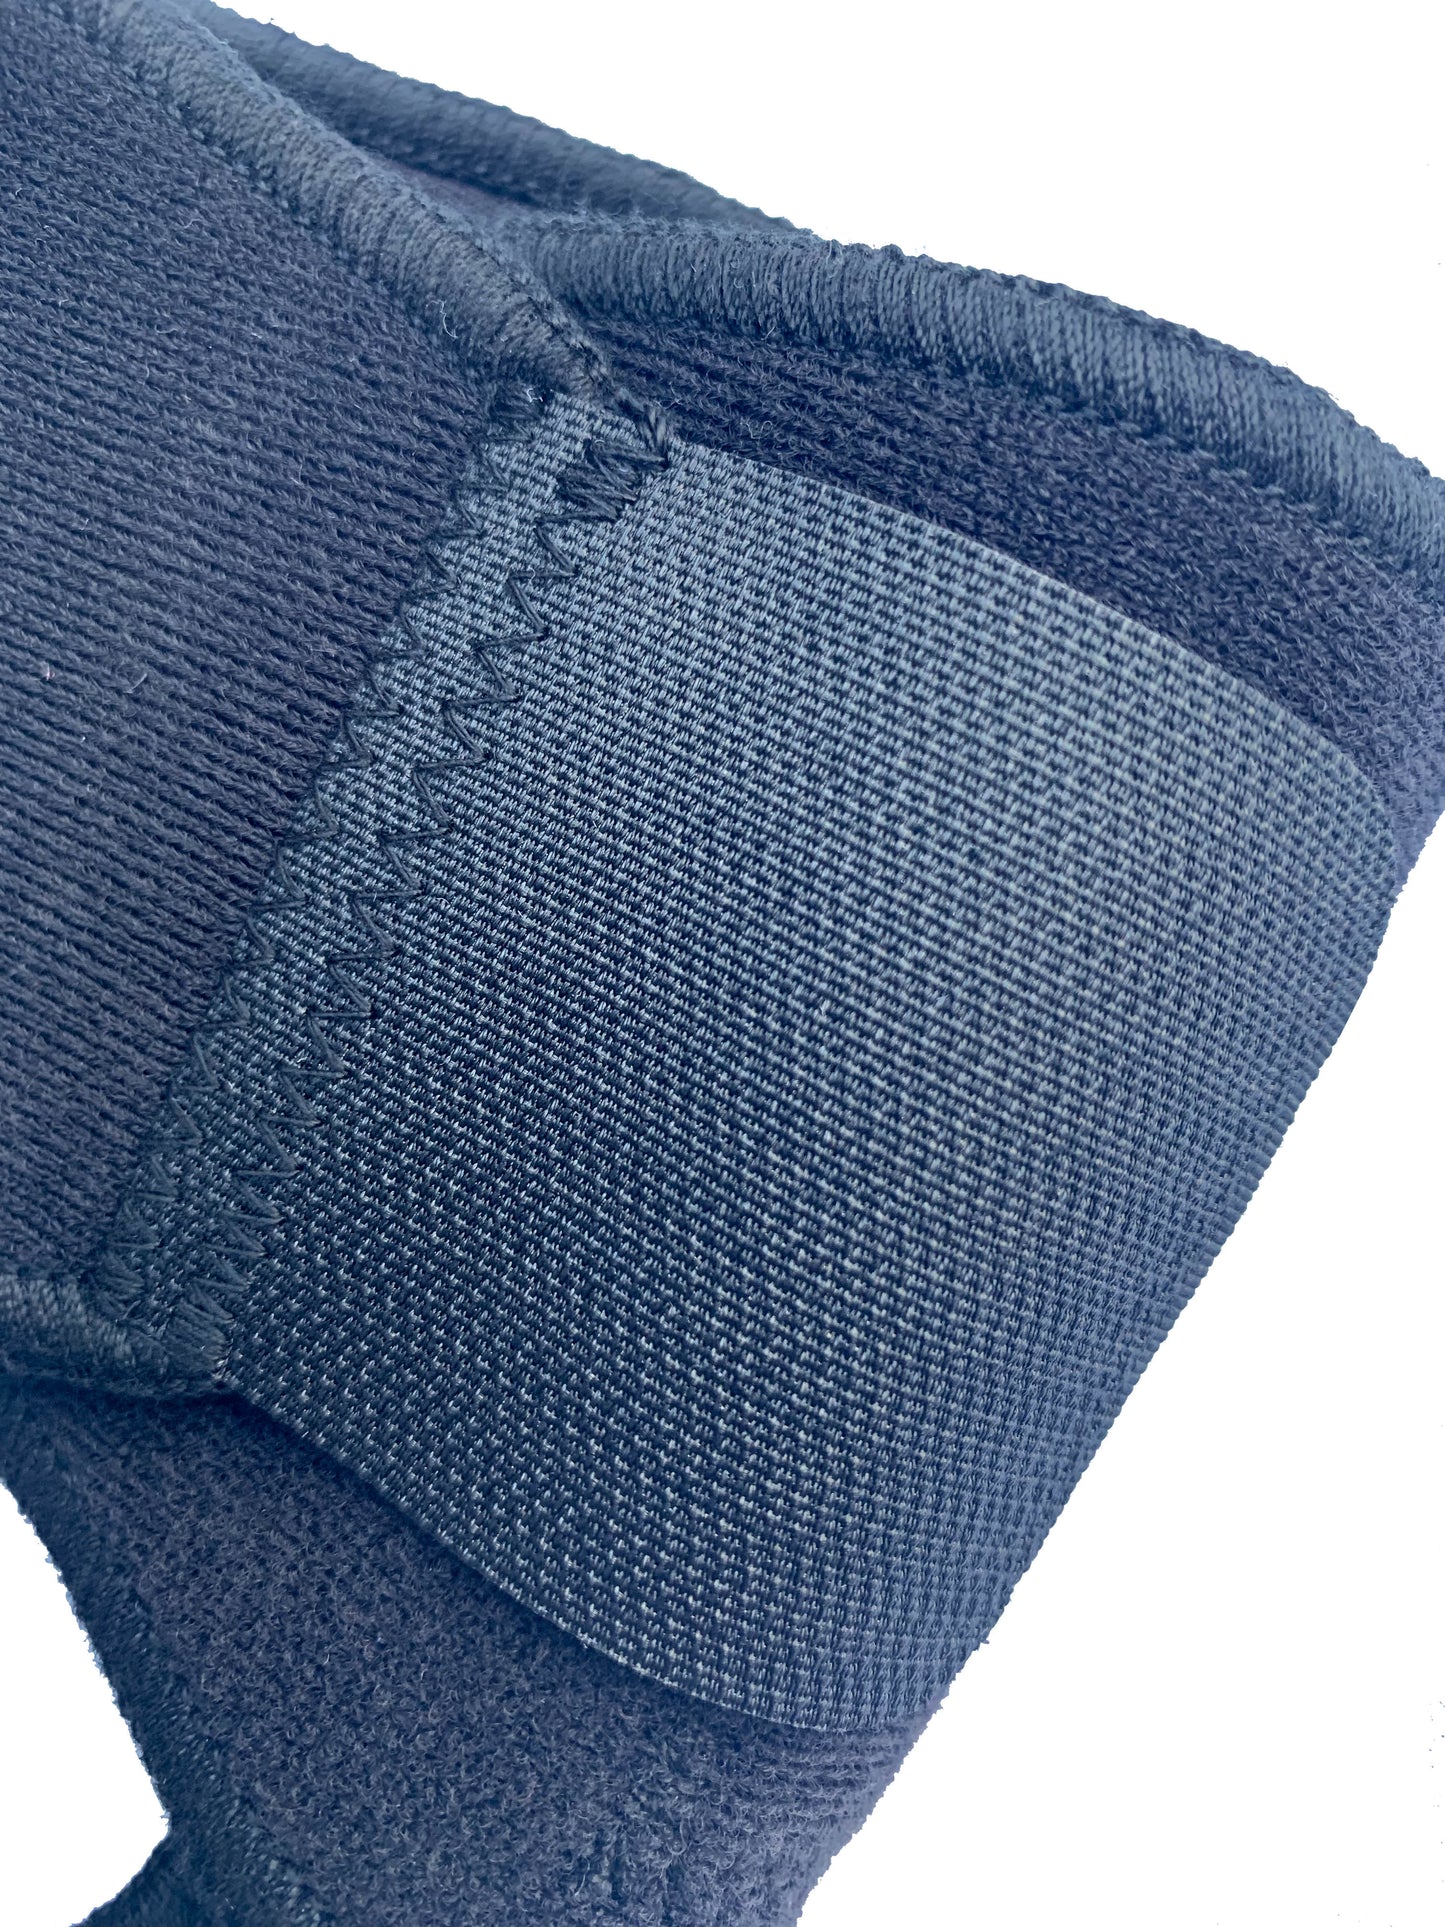 The Bio Magnetic Elbow Support in black up close, showing the quality of the stitching and the quality of the adhesive closure. 